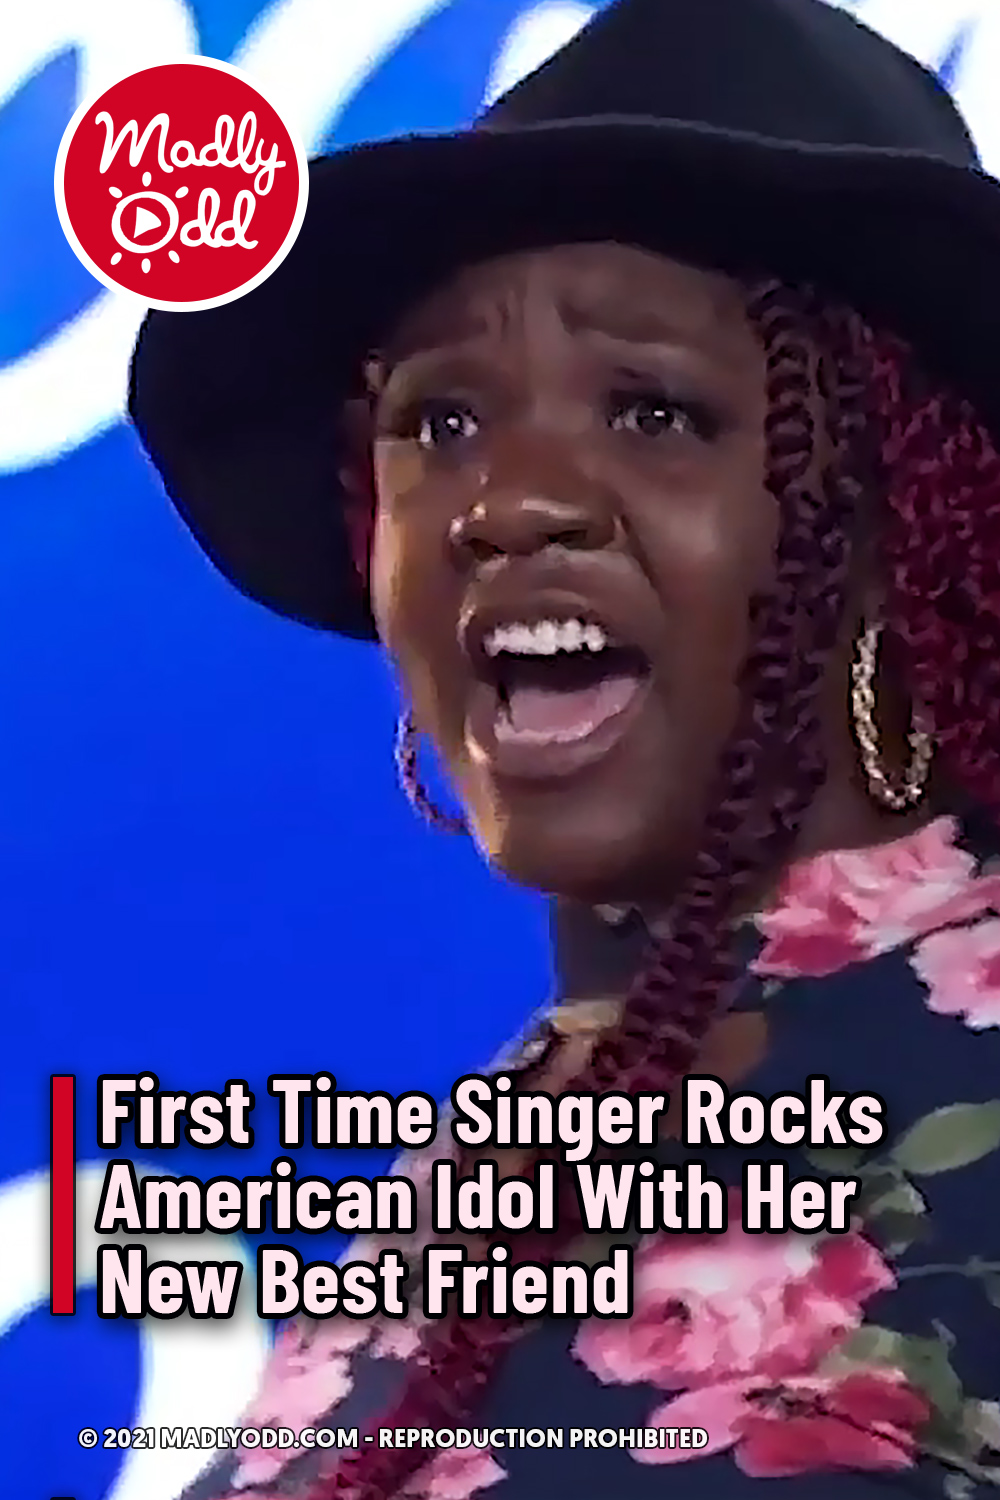 First Time Singer Rocks American Idol With Her New Best Friend